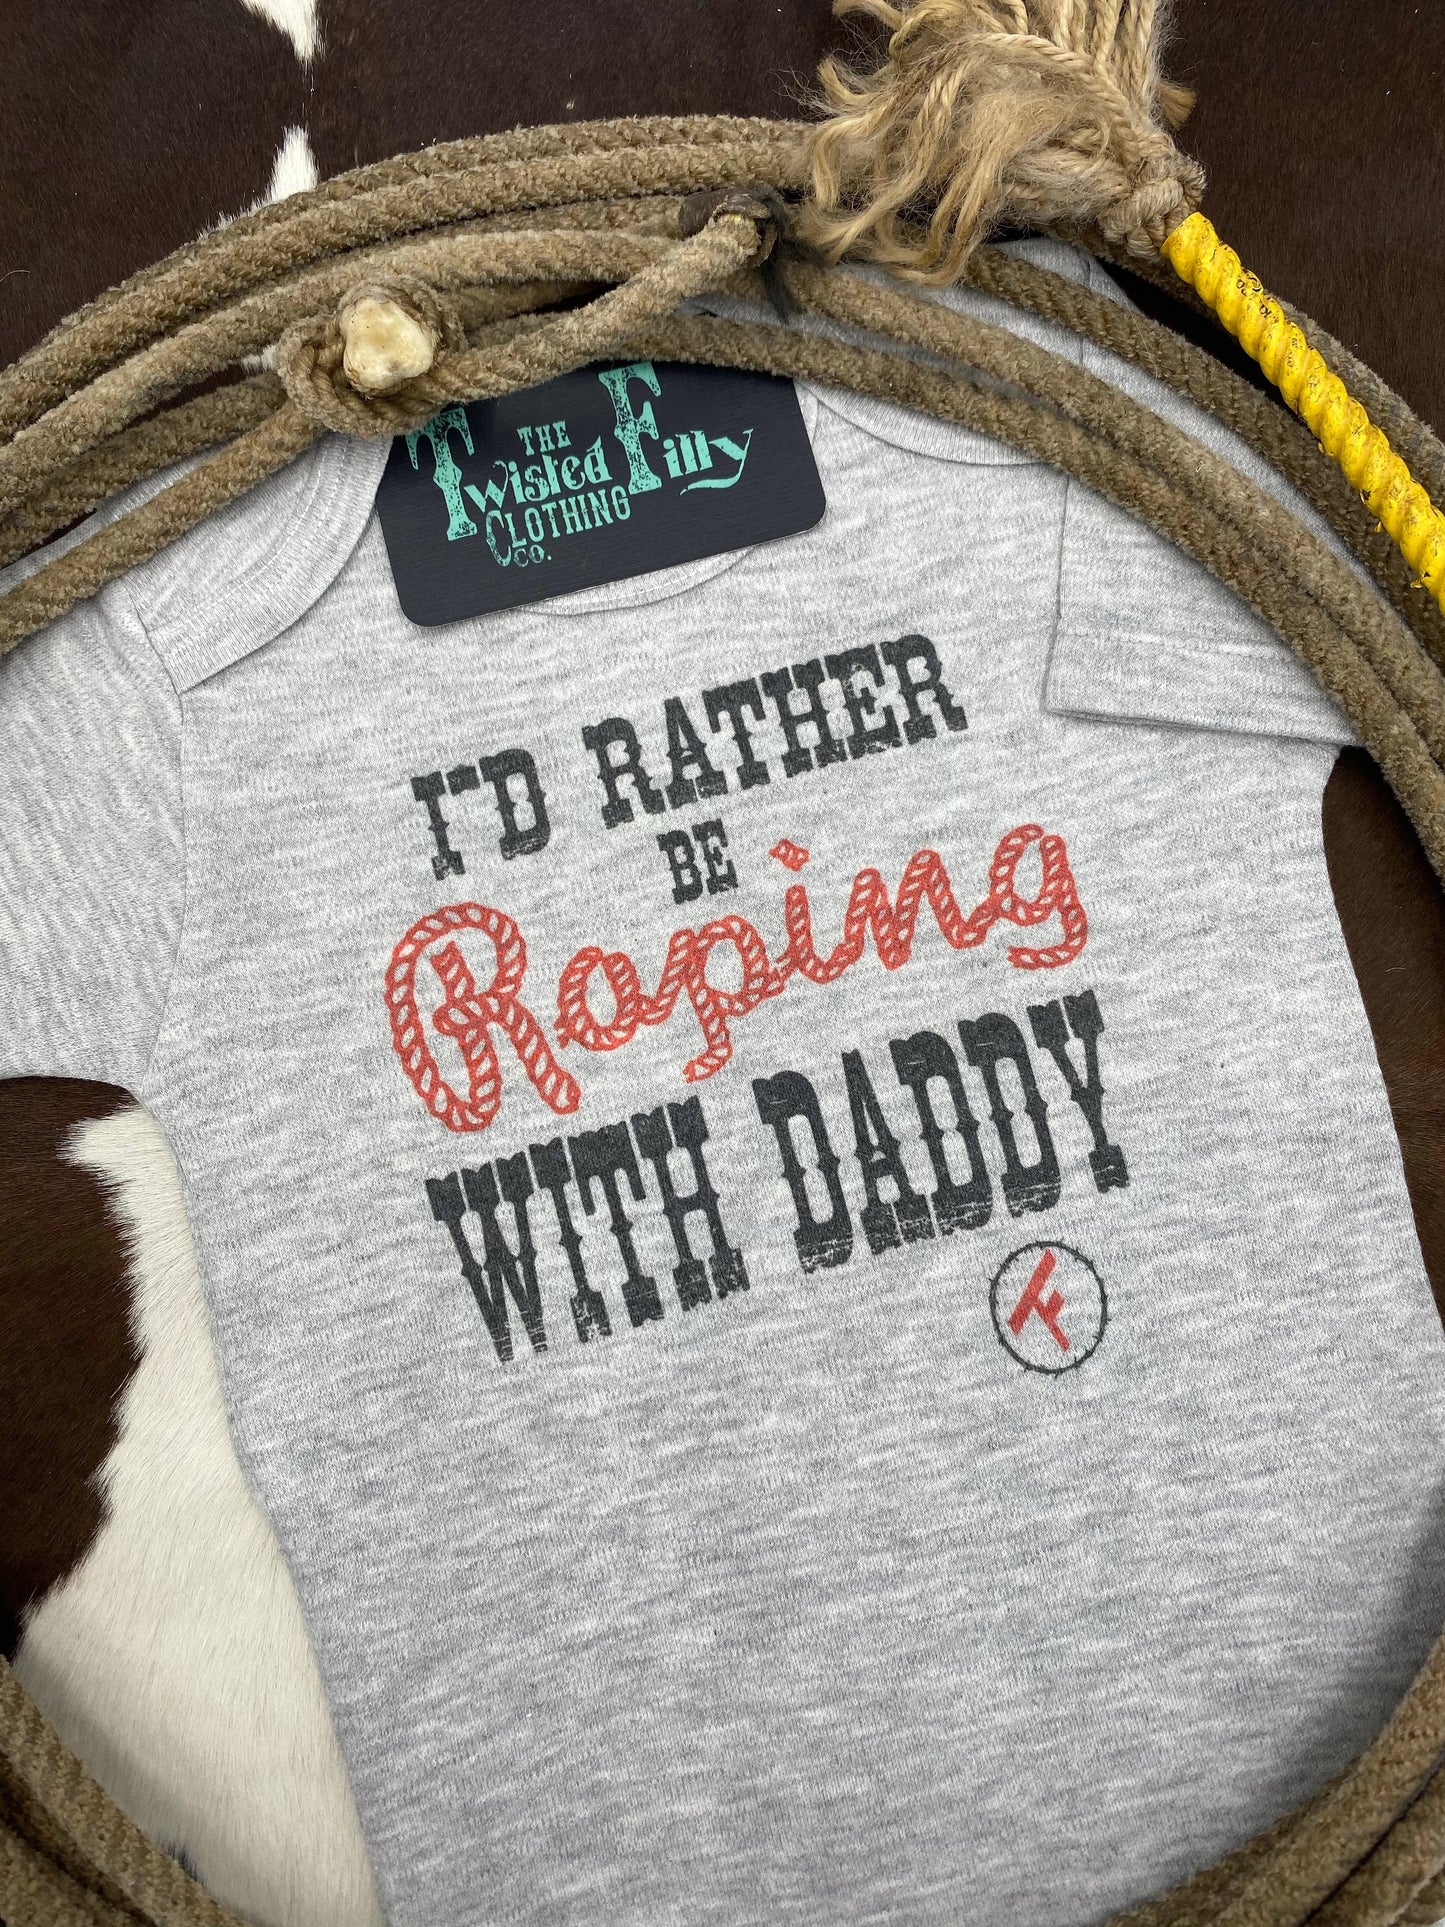 THE TWISTED FILLY CLOTHING CO. I'd Rather Be Roping with Daddy - S/S Infant One Piece - Grey